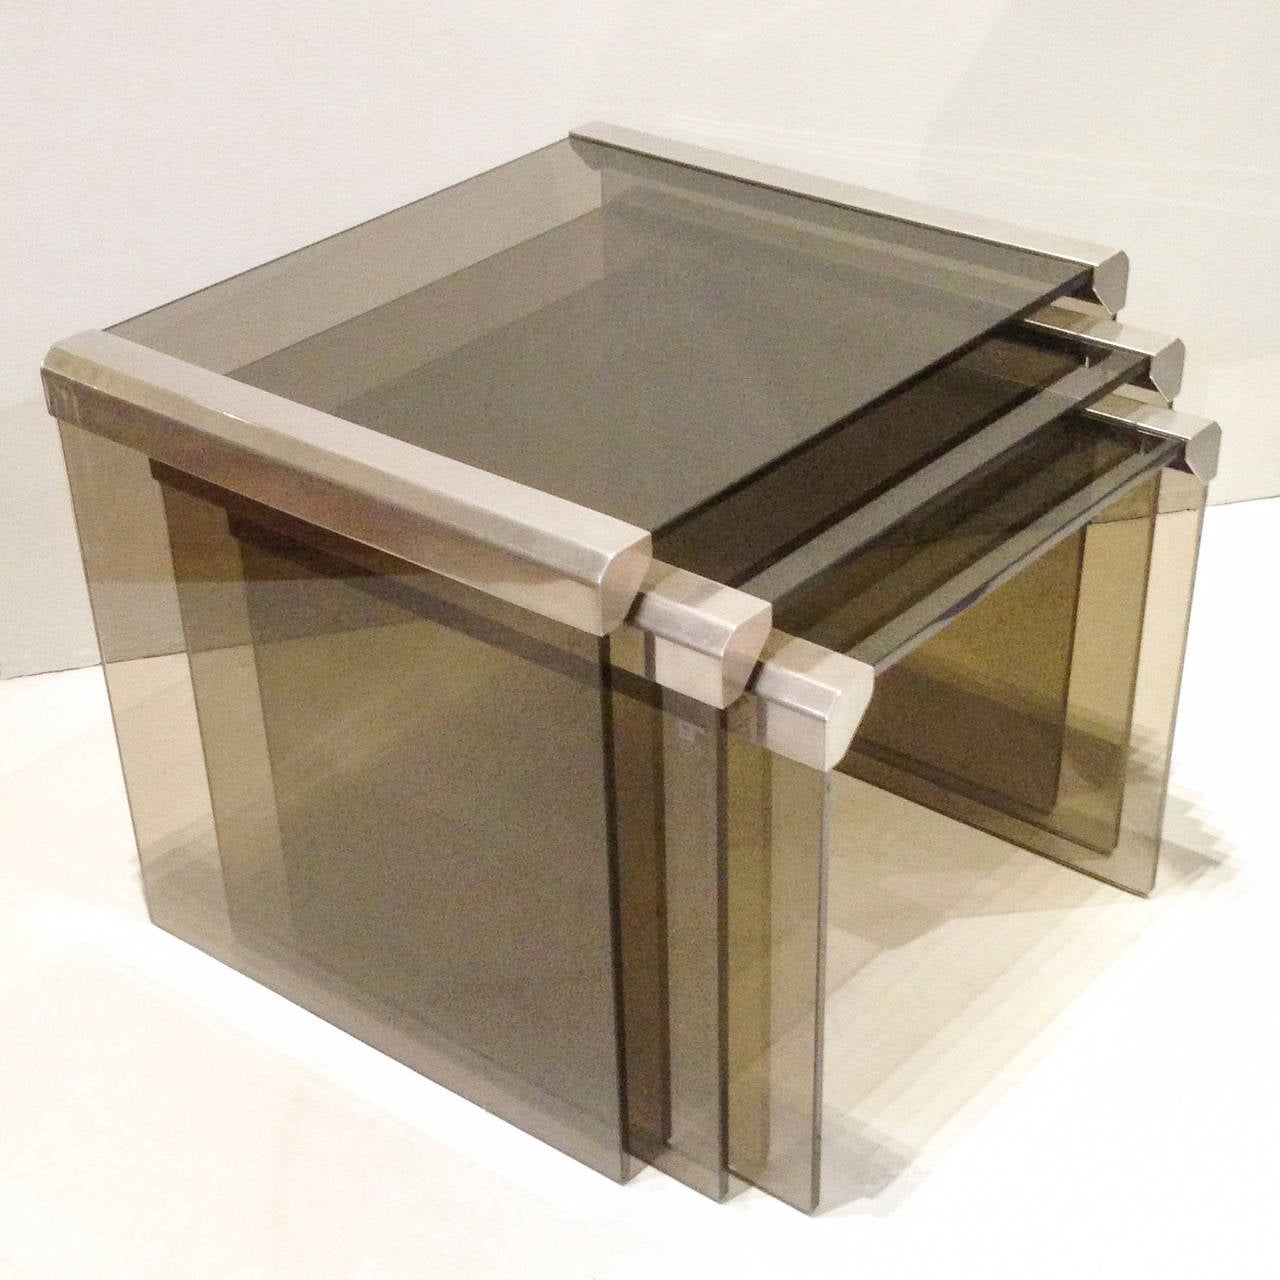 A Set Of Three Smoked Glass And Polished Steel Nesting Tables By Gallotti & Radice